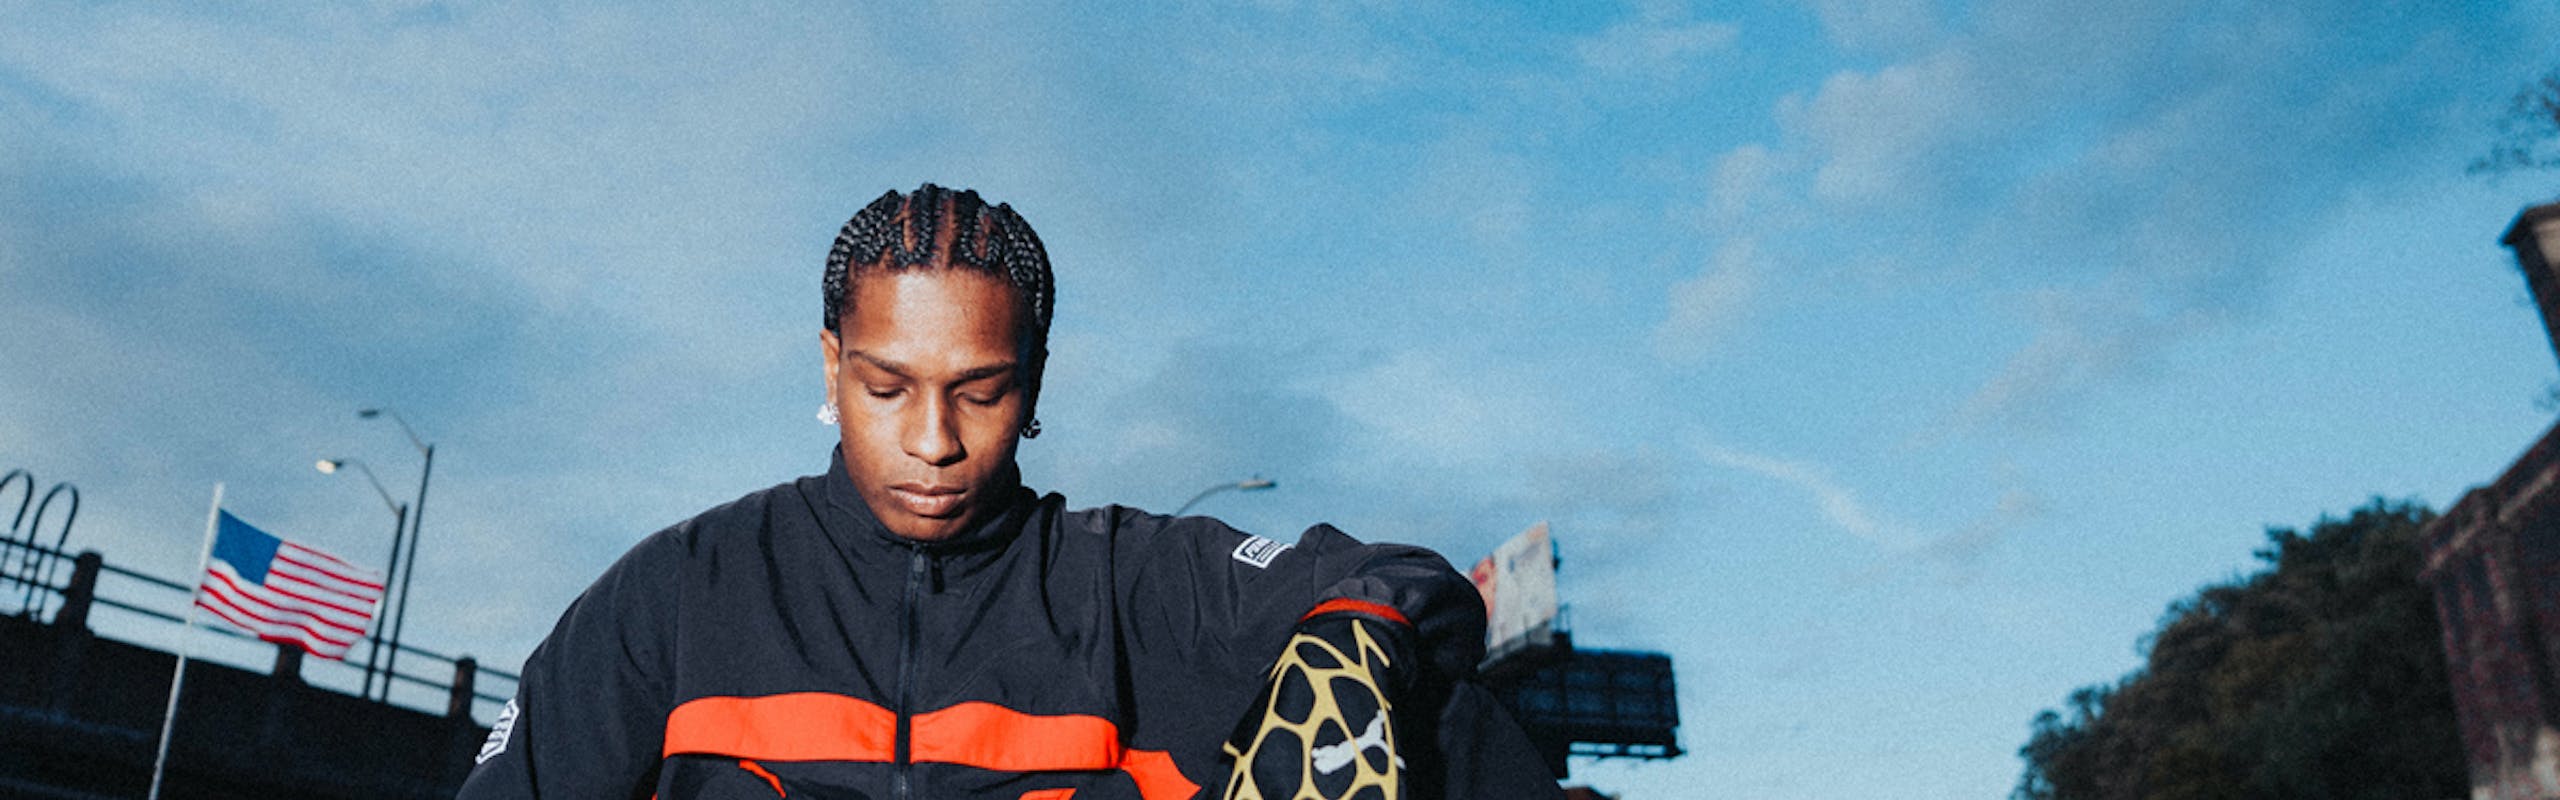 asap rocky in a black and orange racing suit sitting atop a car